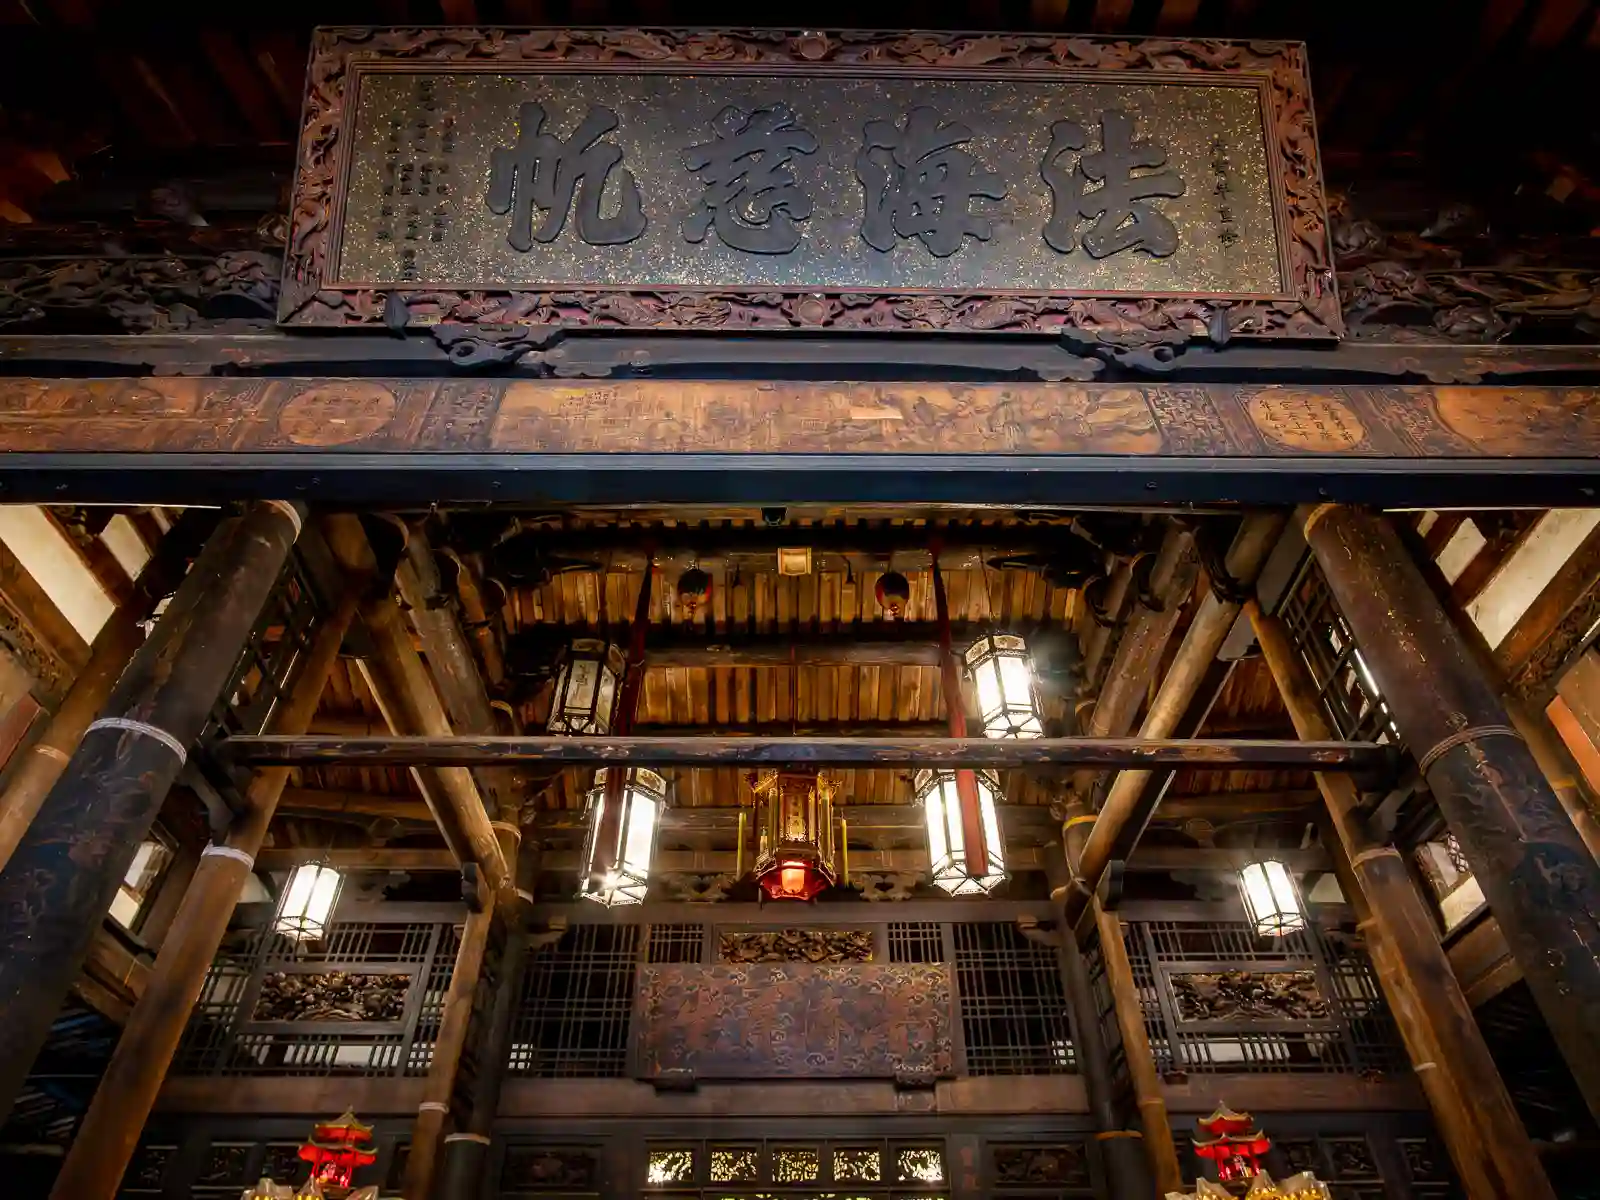 Intricate carvings are visible on several panes in the ceiling of one of Longshan Temple's halls.